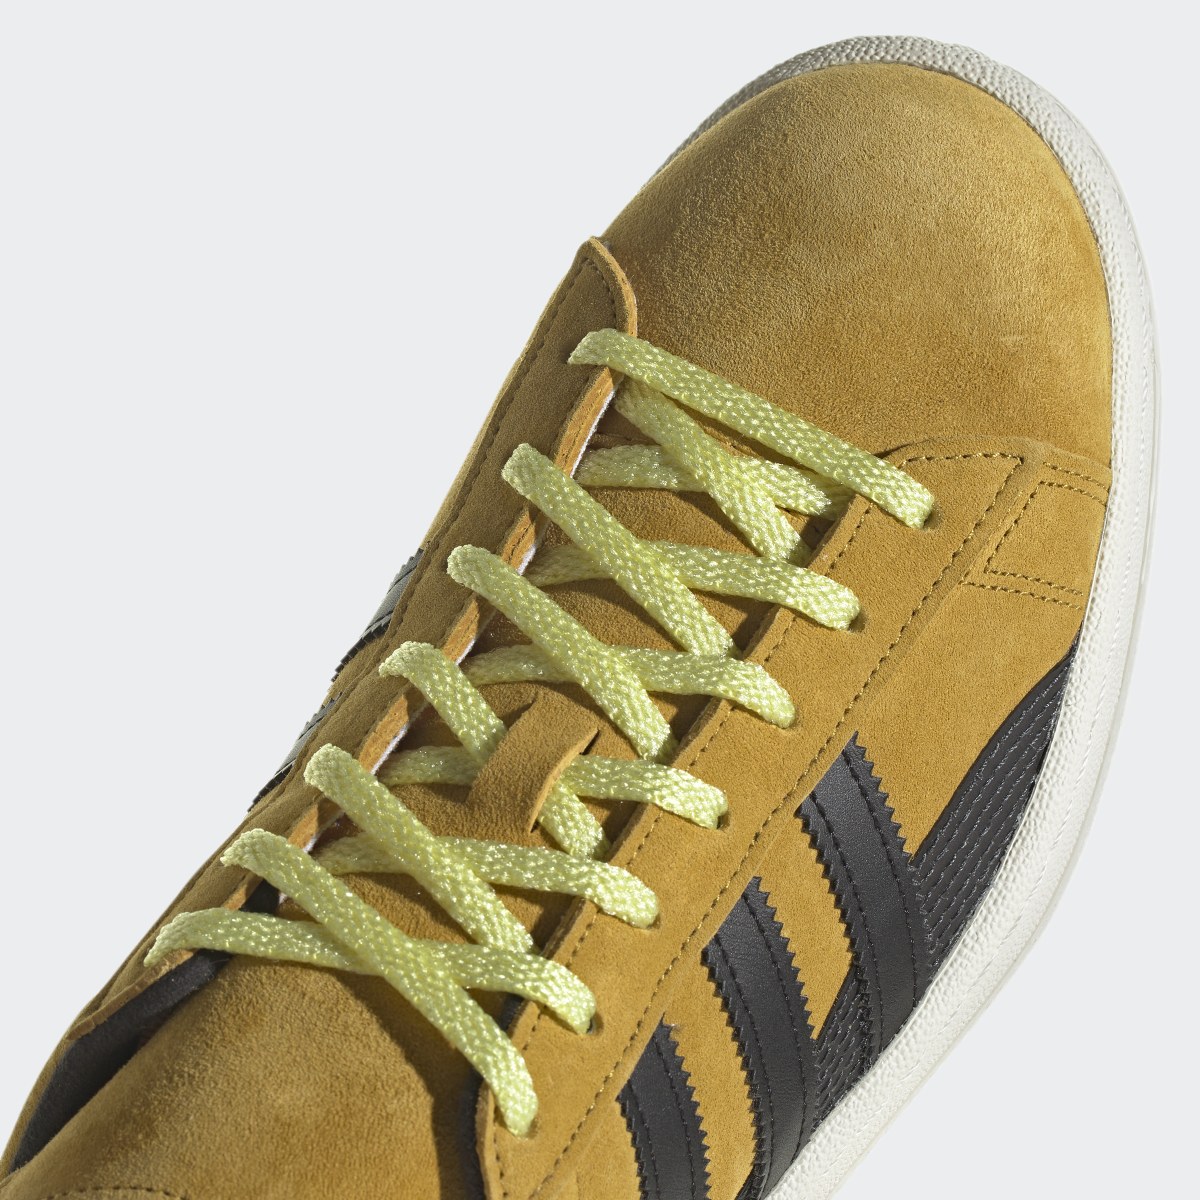 Adidas Campus 80s Shoes. 11